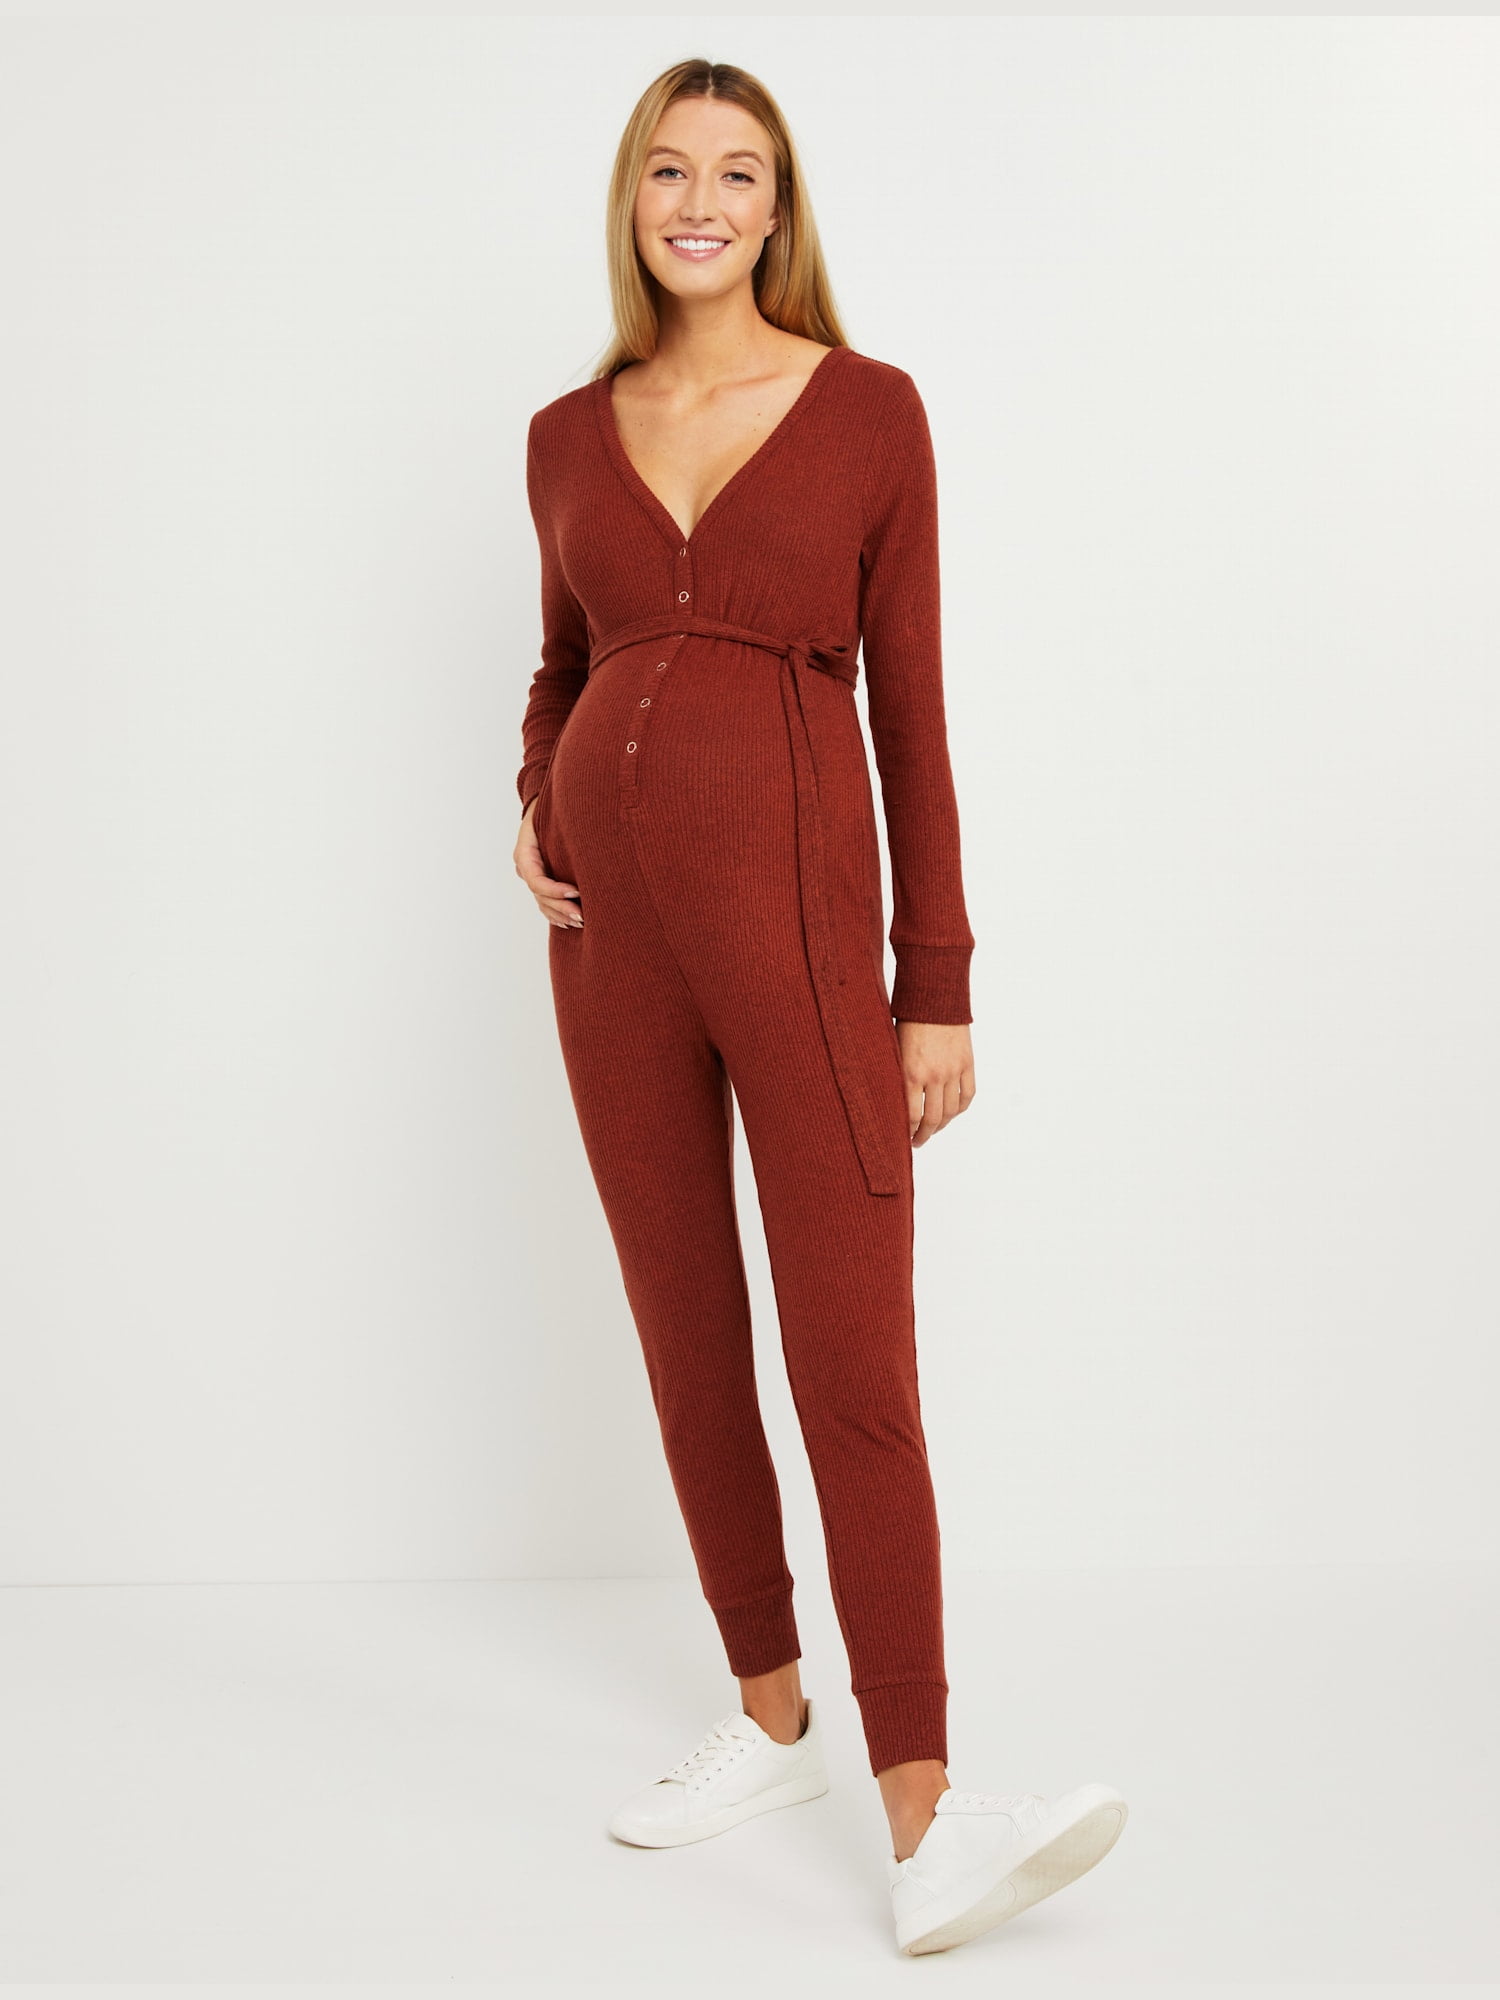 Amorino Sweetheart Neckline Backless Jumpsuit in Red | Oh Polly